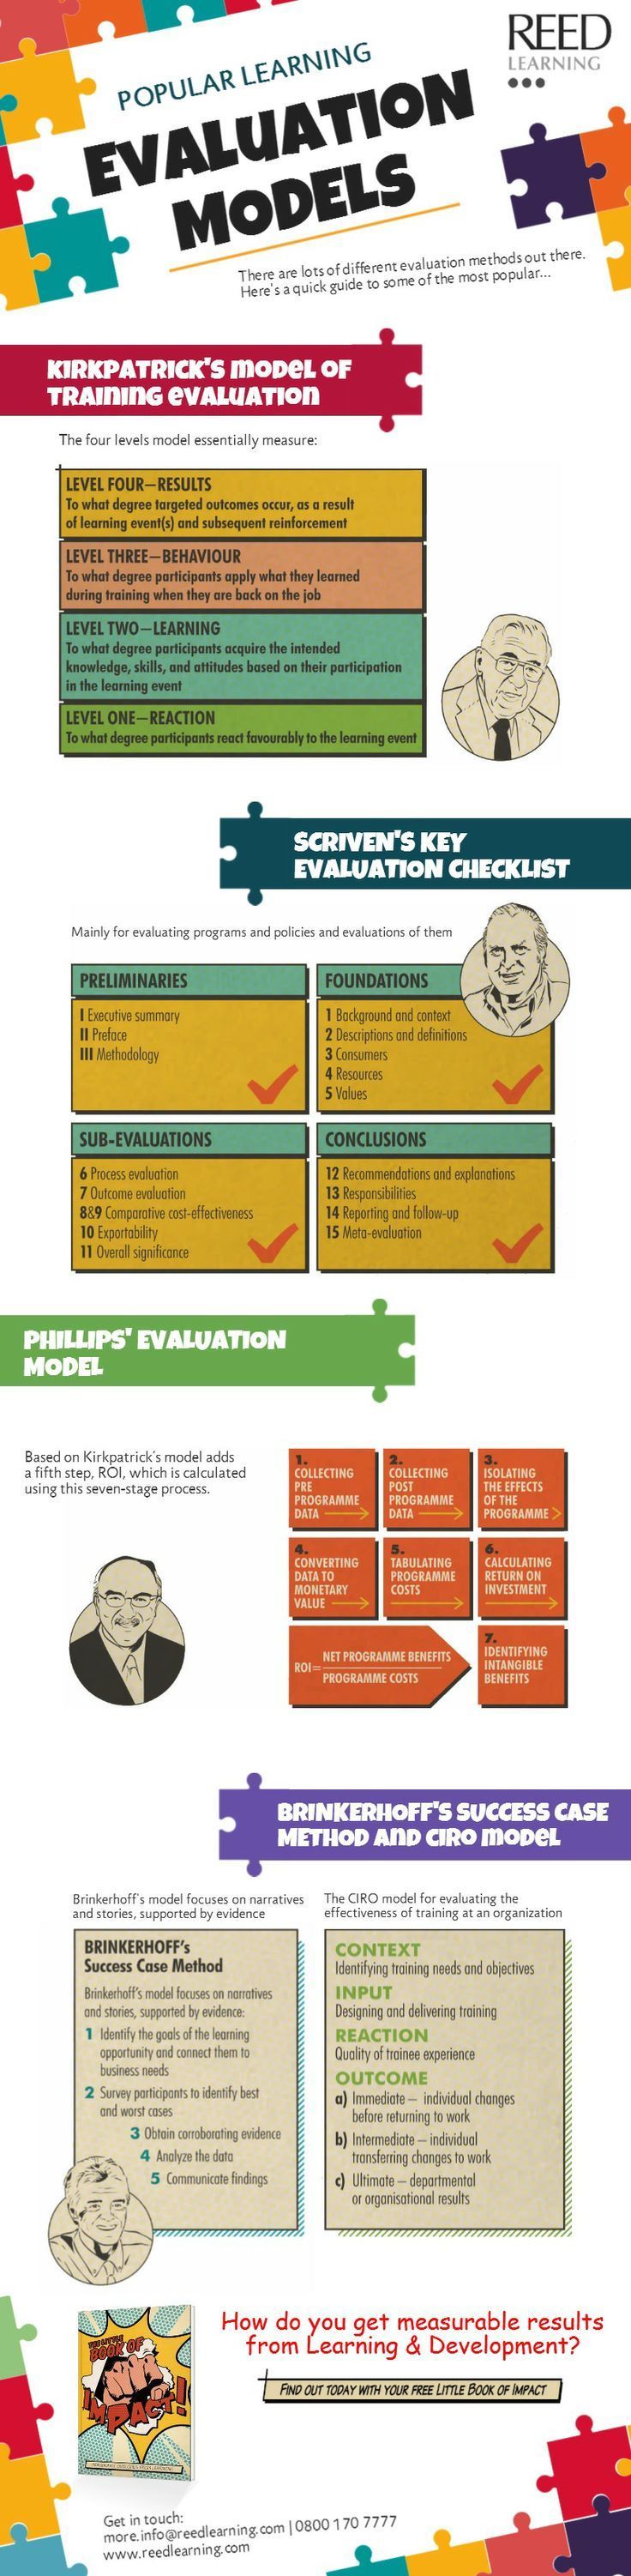 Popular Learning Evaluation Models Infographic